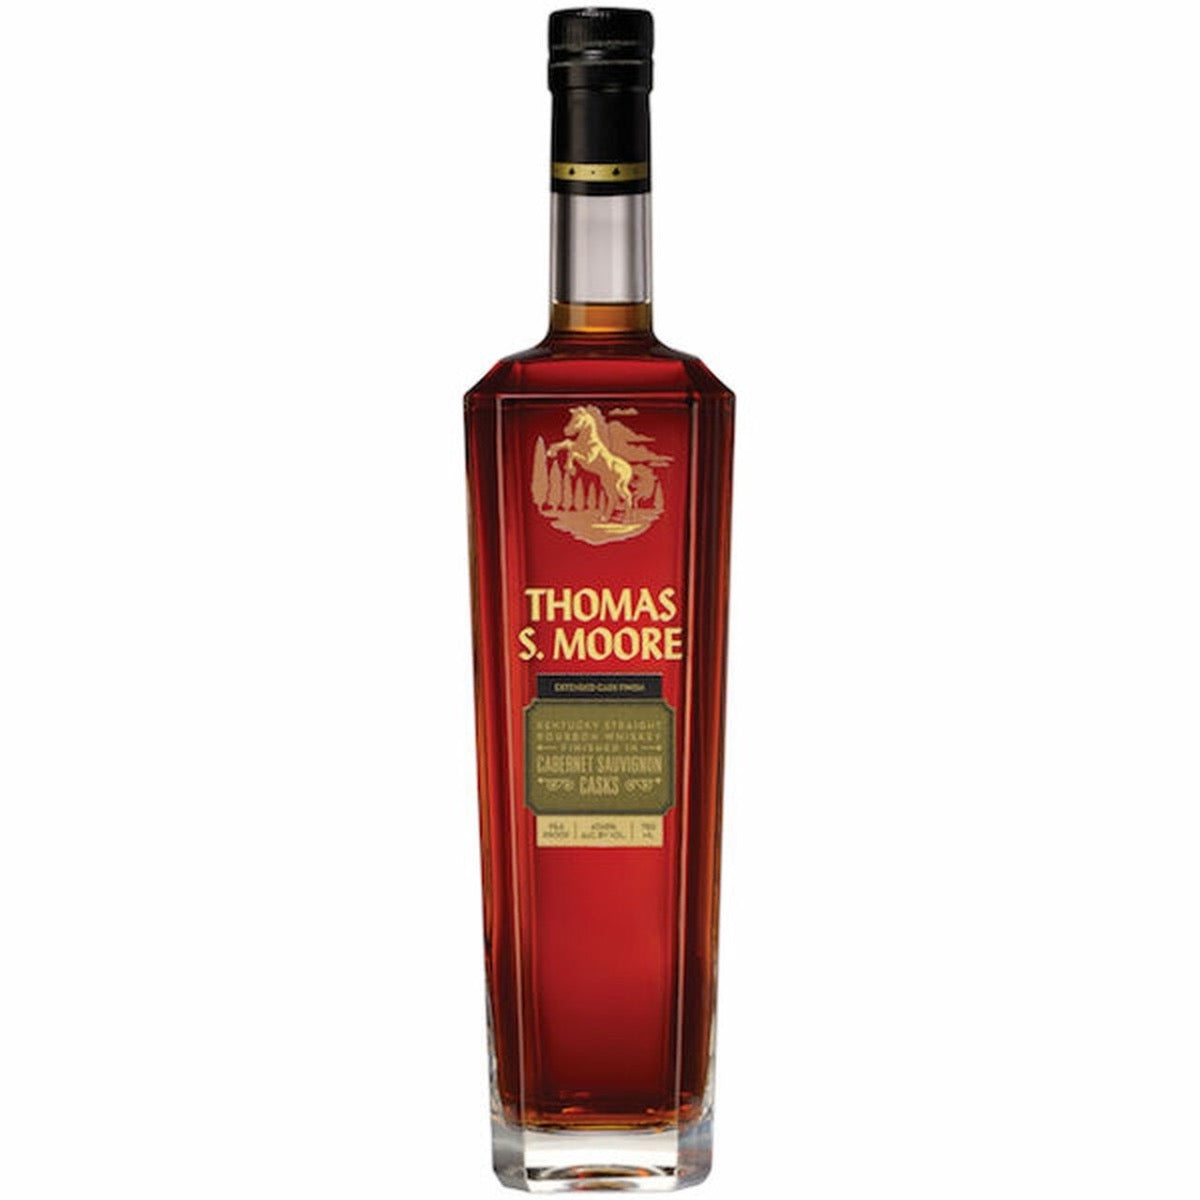 THOMAS S MOORE BOURBON FINISHED IN CABERNET SAUVIGNON CASKS EXTENDED CASK FINISH KENTUCKY 750ML - Remedy Liquor